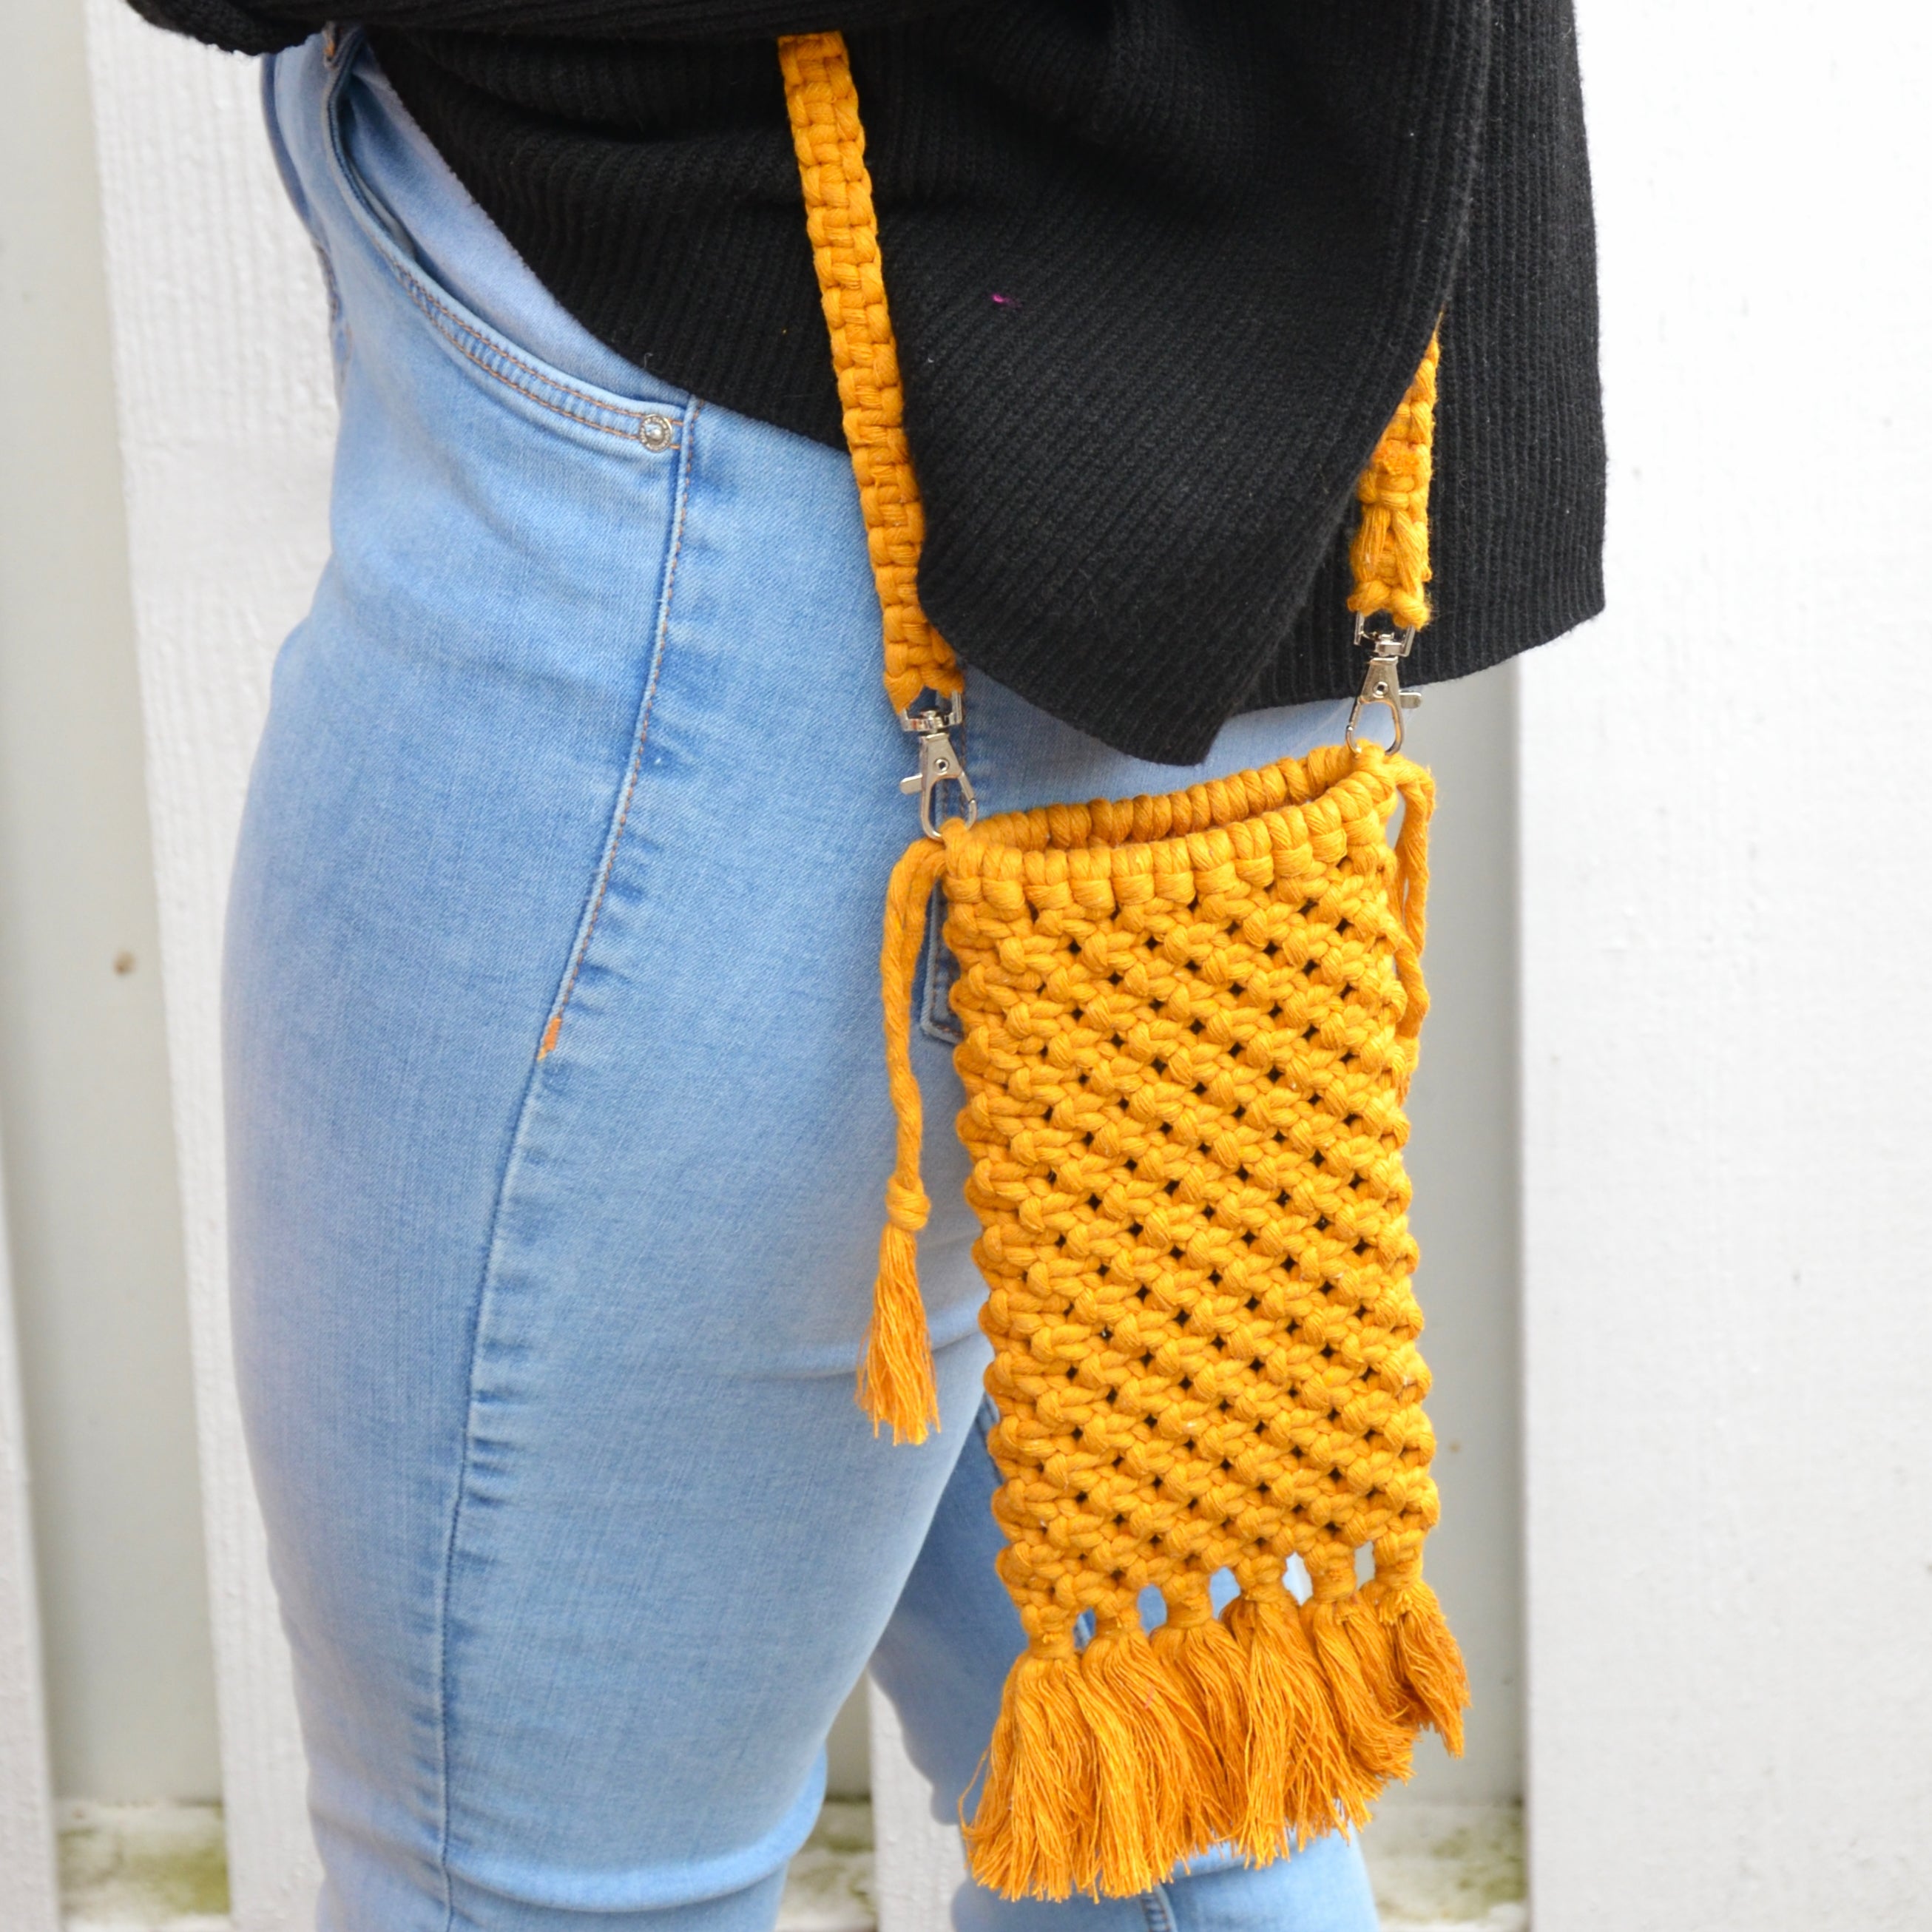 A woman carrying a mustard yellow macrame mobile phone bag with fringe detailing and a shoulder strap